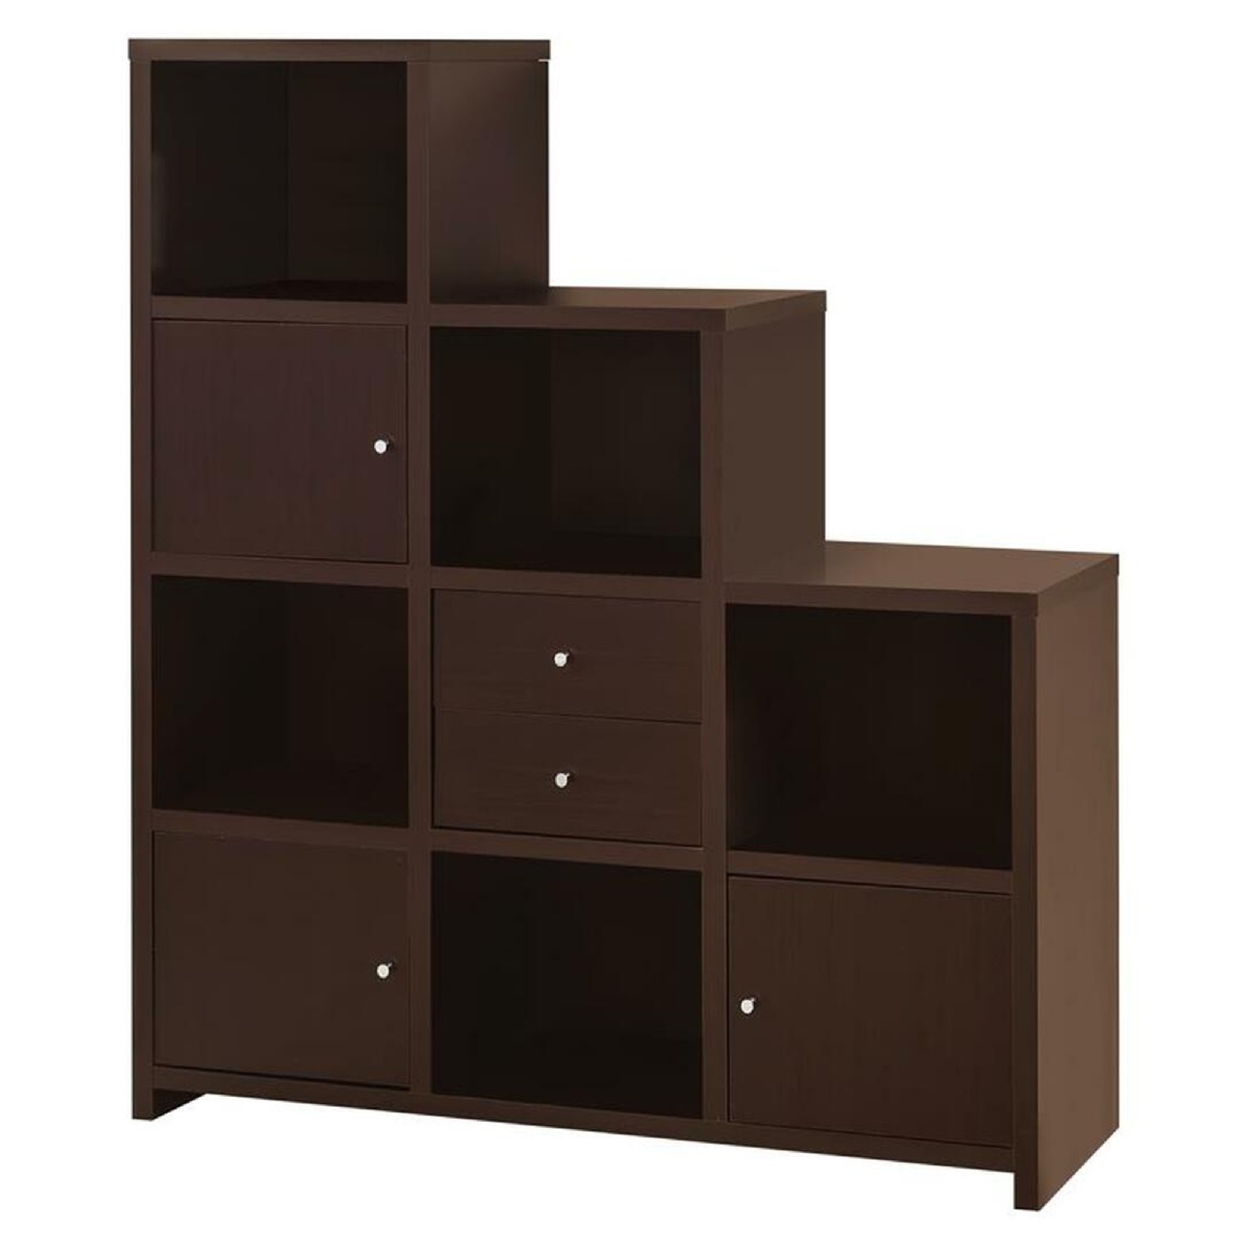 Contemporary Bookcase With Stair Like Design, Brown- Saltoro Sherpi